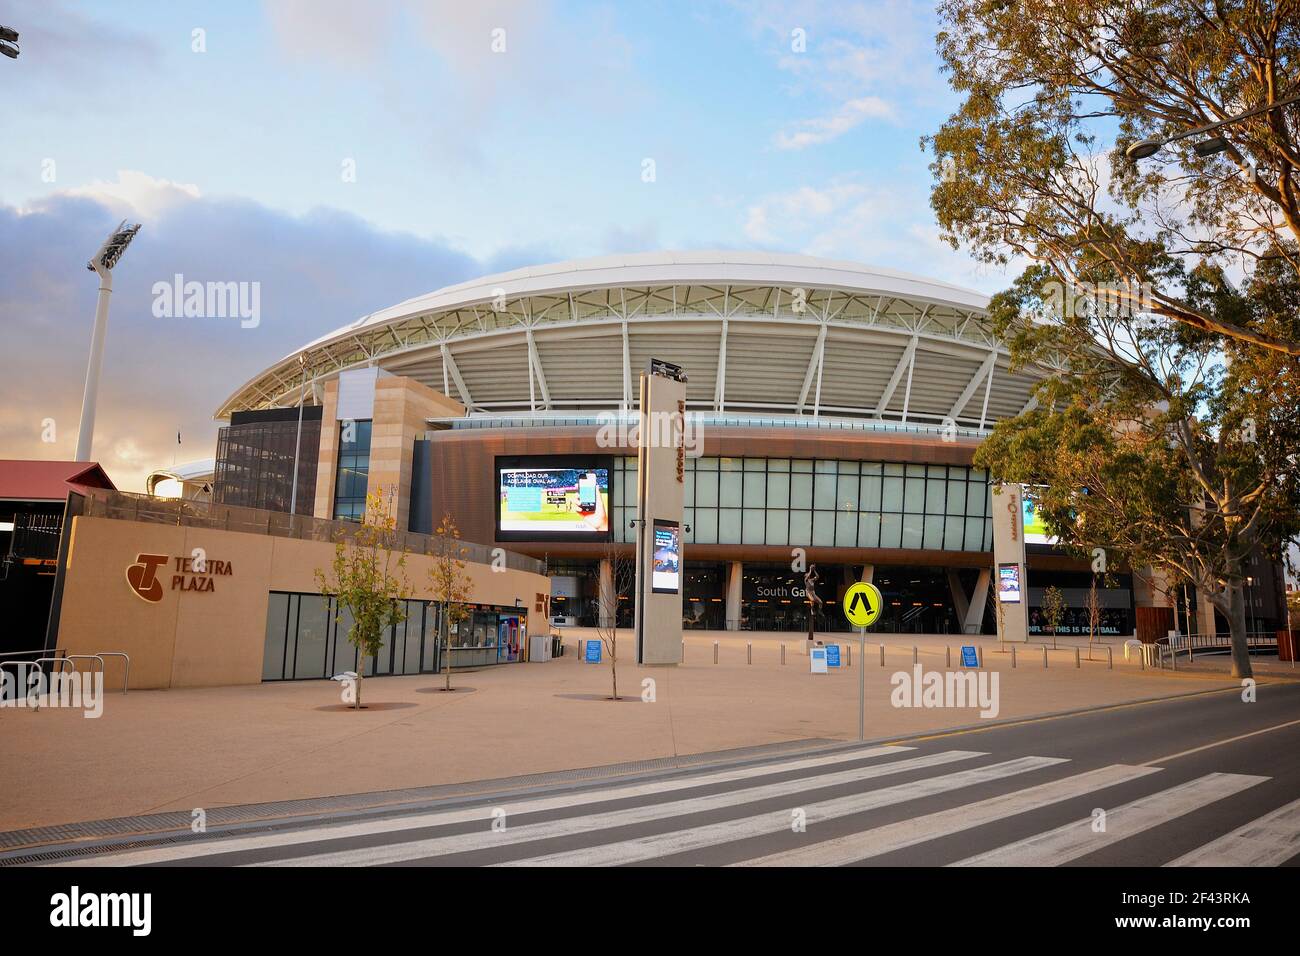 The South Gate entrance to the redeveloped Adelaide Oval which was